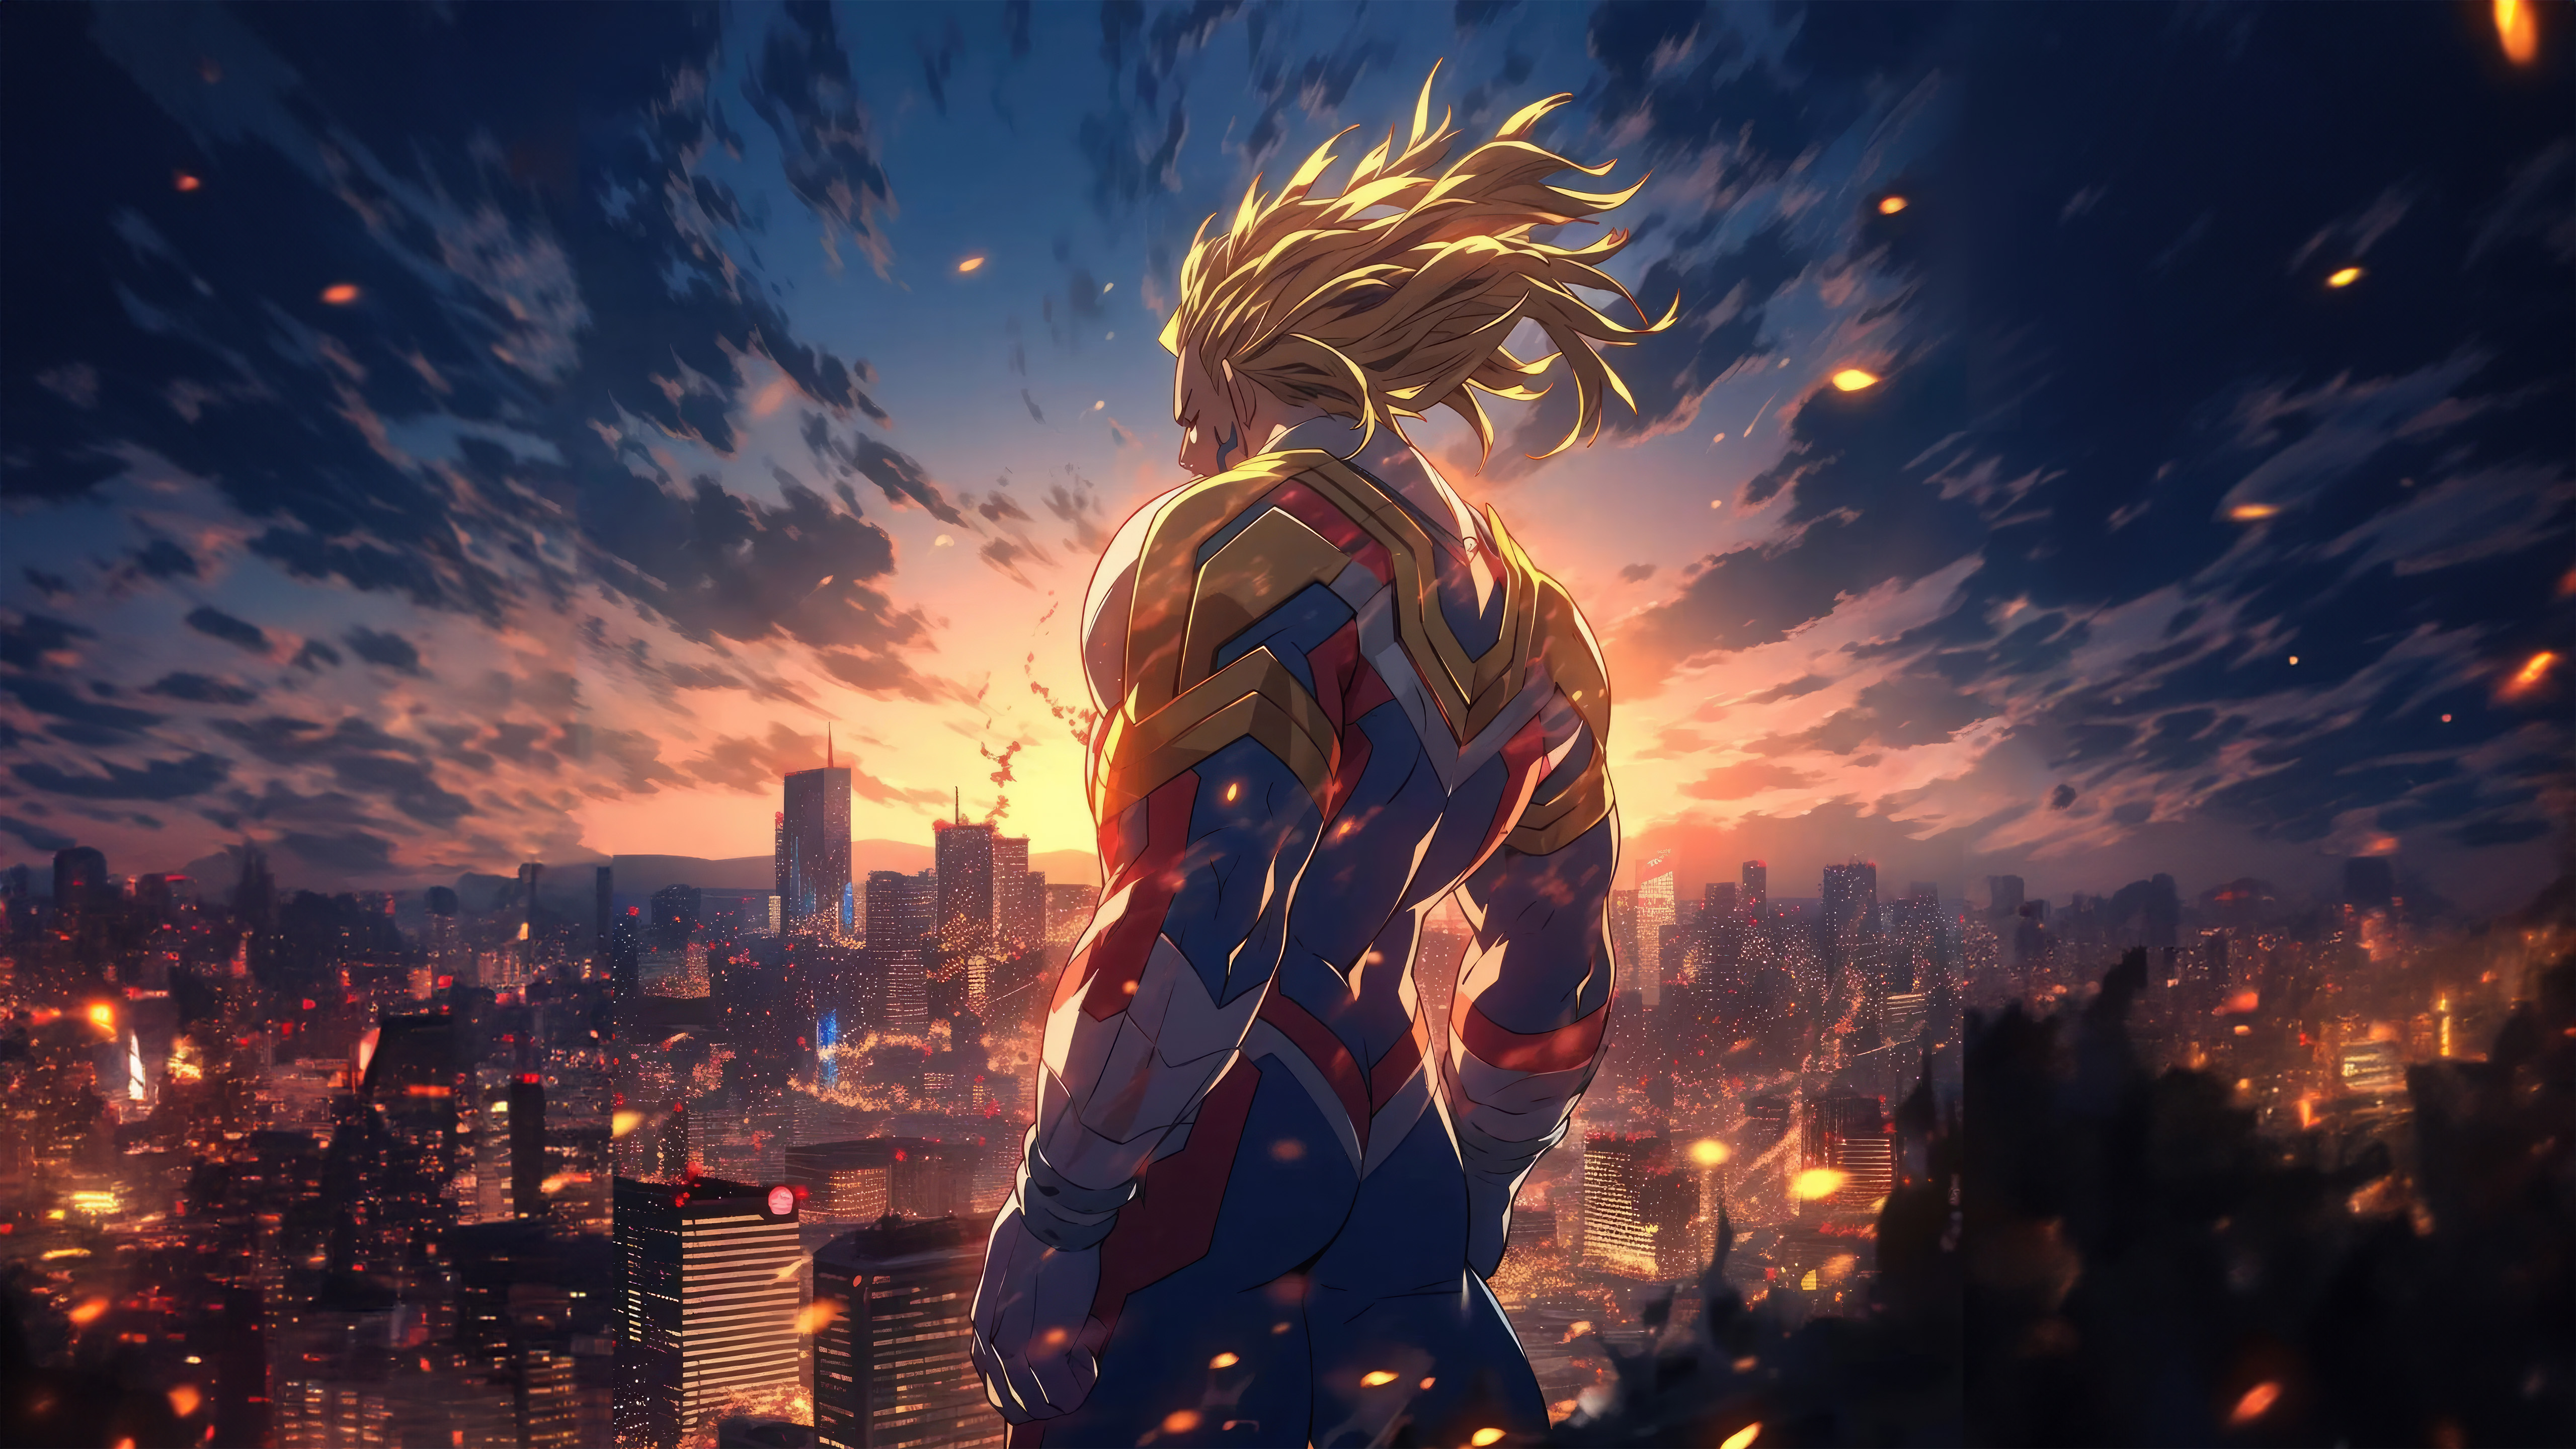 190+ All Might HD Wallpapers and Backgrounds